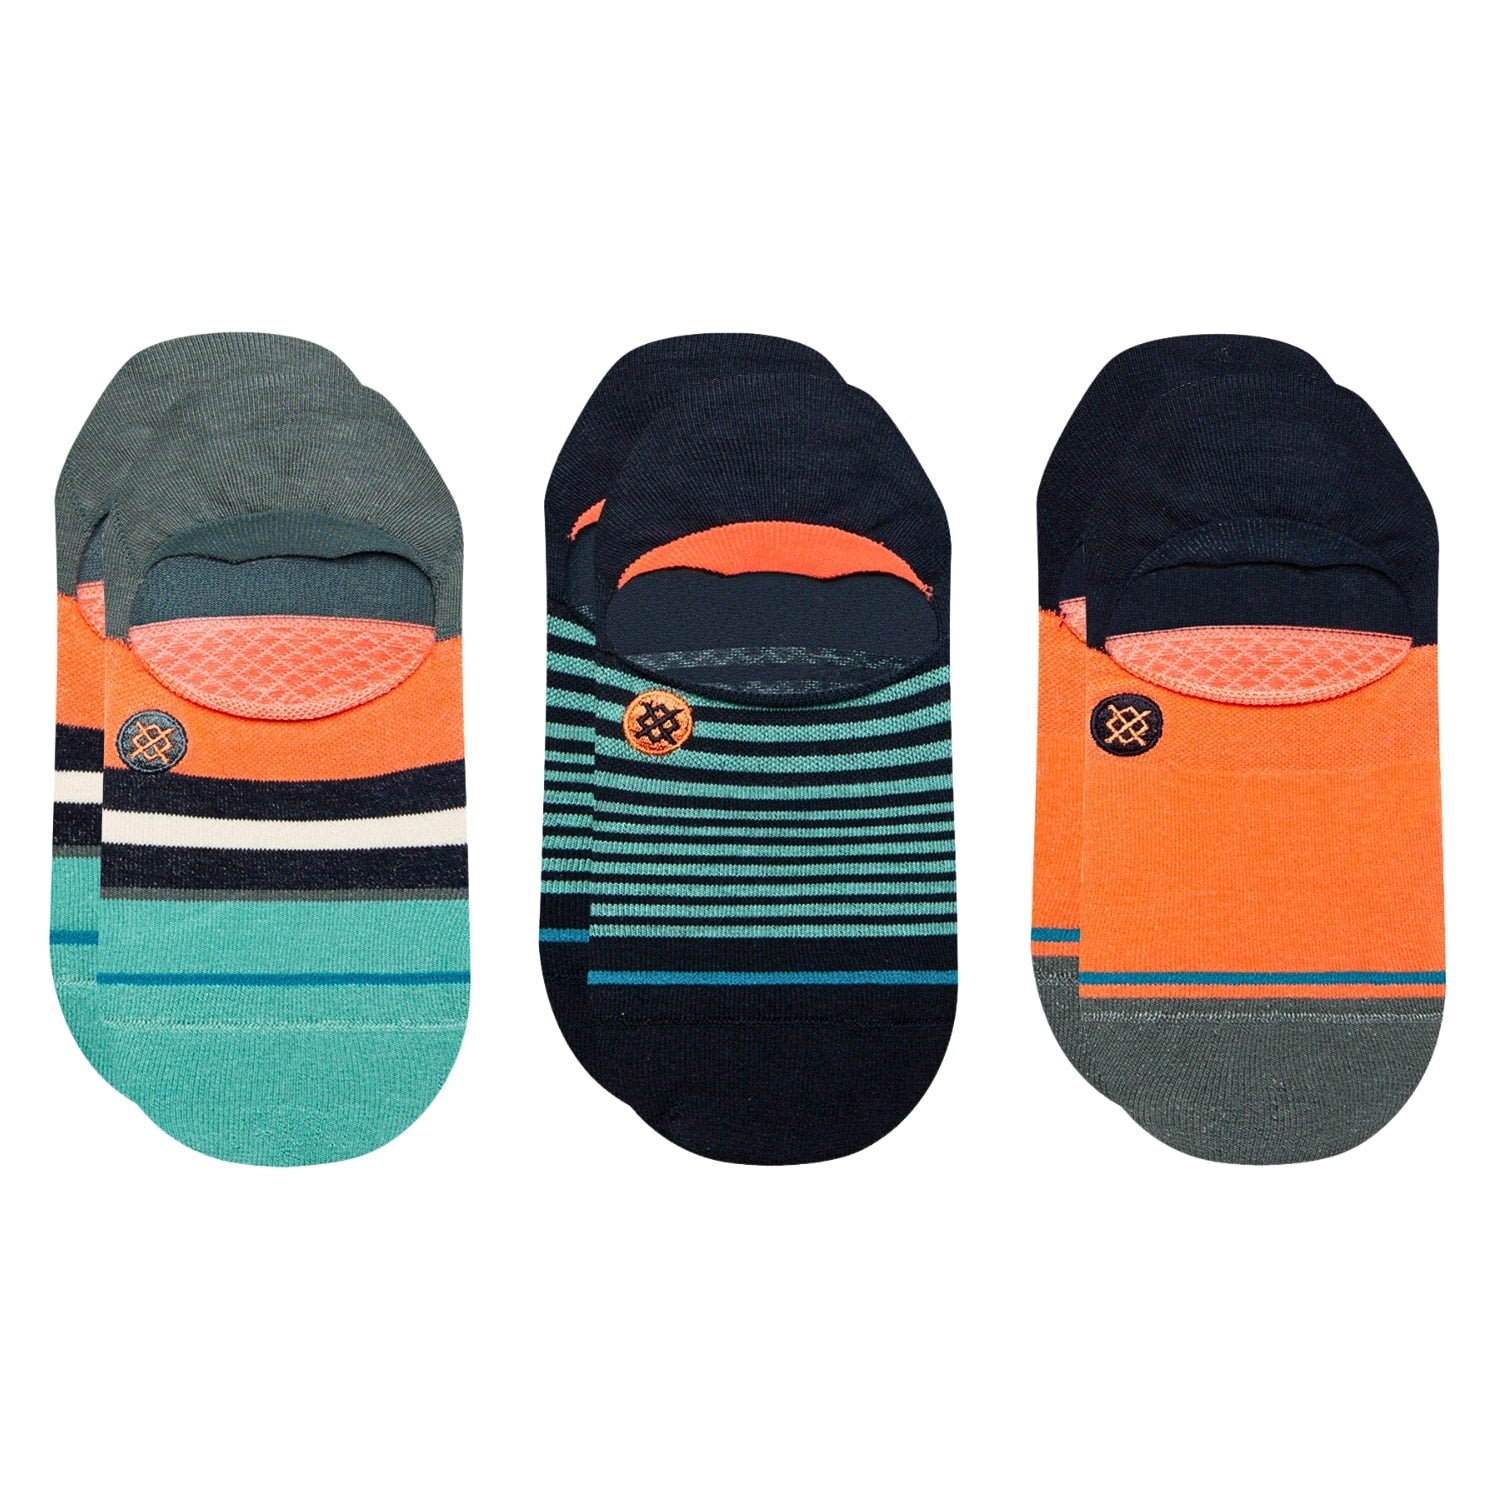 Stance Neptune No Show Socks 3 Pack - Multi - Unisex Invisible/No Show Socks by Stance